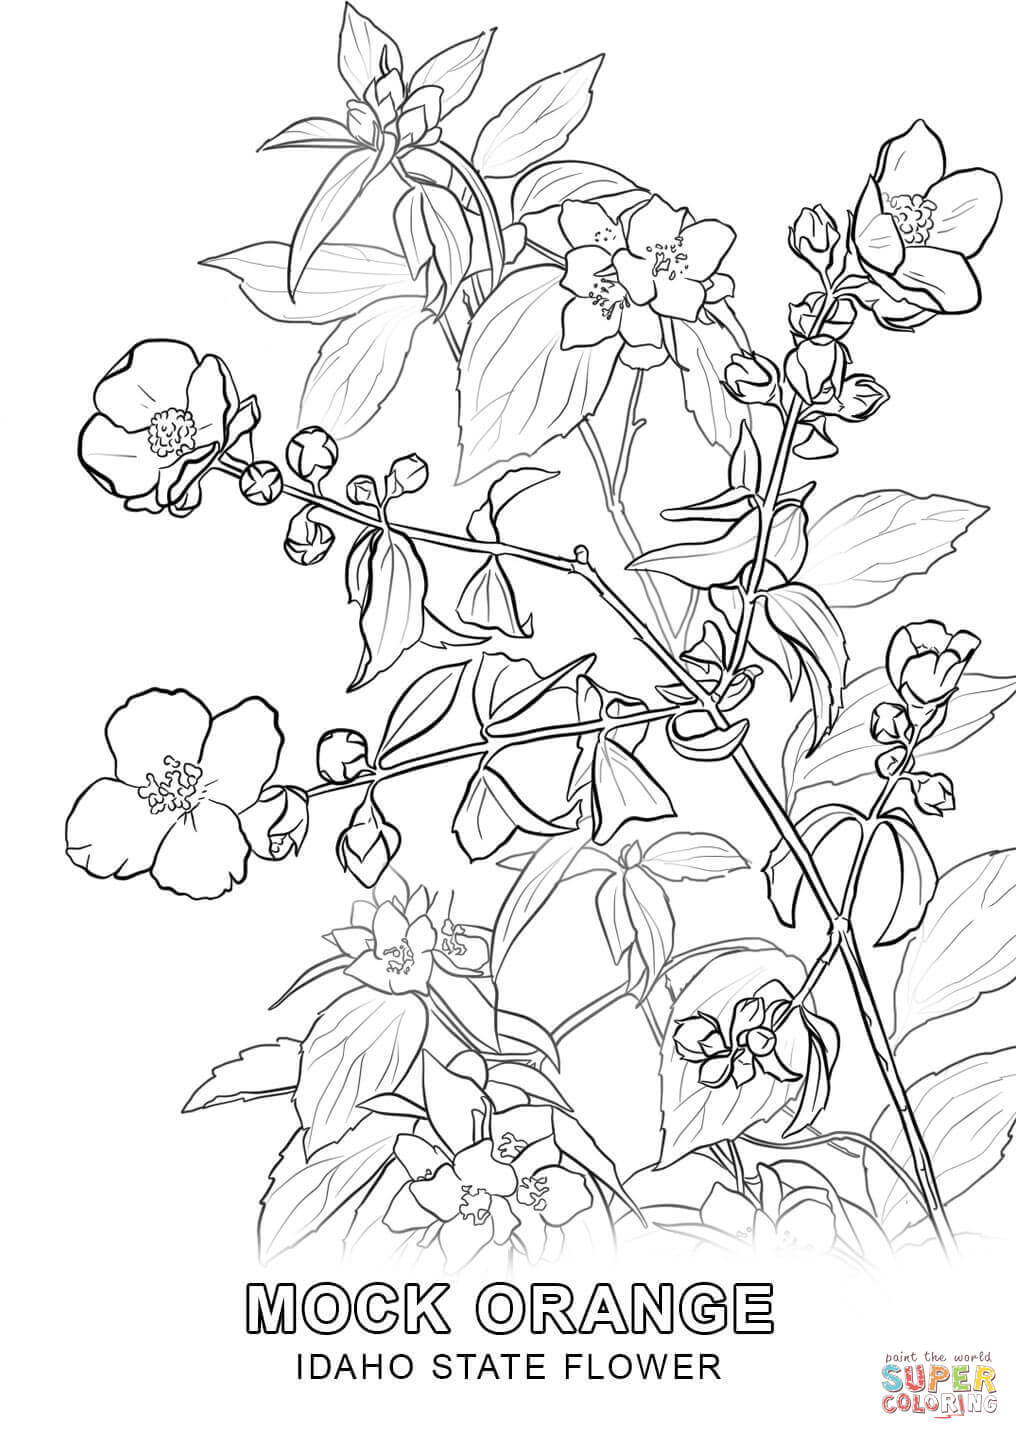 Idaho State Flower coloring page | Free Printable Coloring Pages